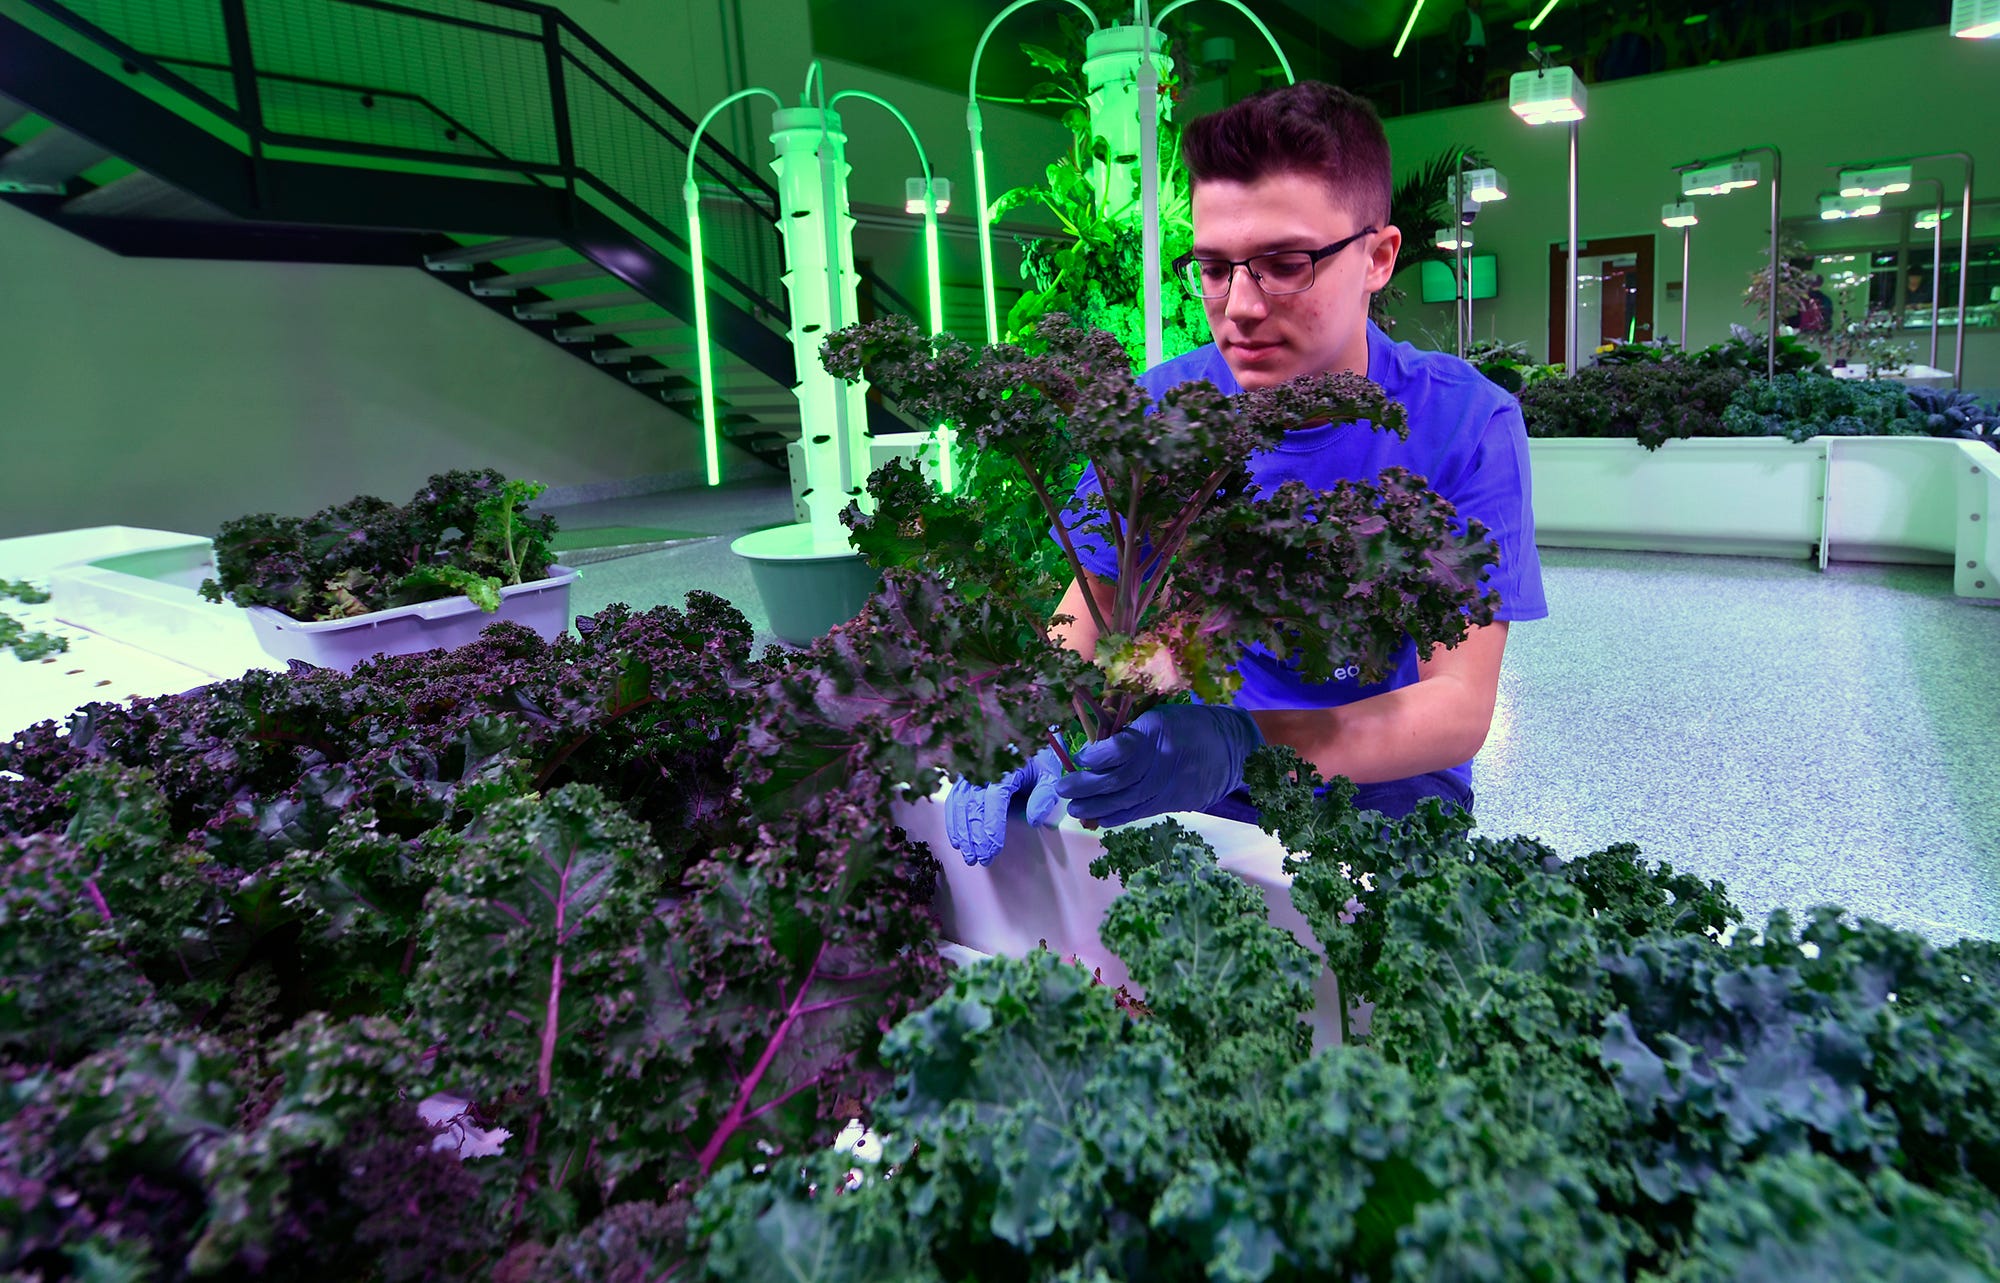 Nathaniel Saxe, a CCA junior from Springettsbury Township, harvests kale at the Agworks aquaponics facility in Harrisburg, Tuesday, January 8, 2019.  
John A. Pavoncello photo